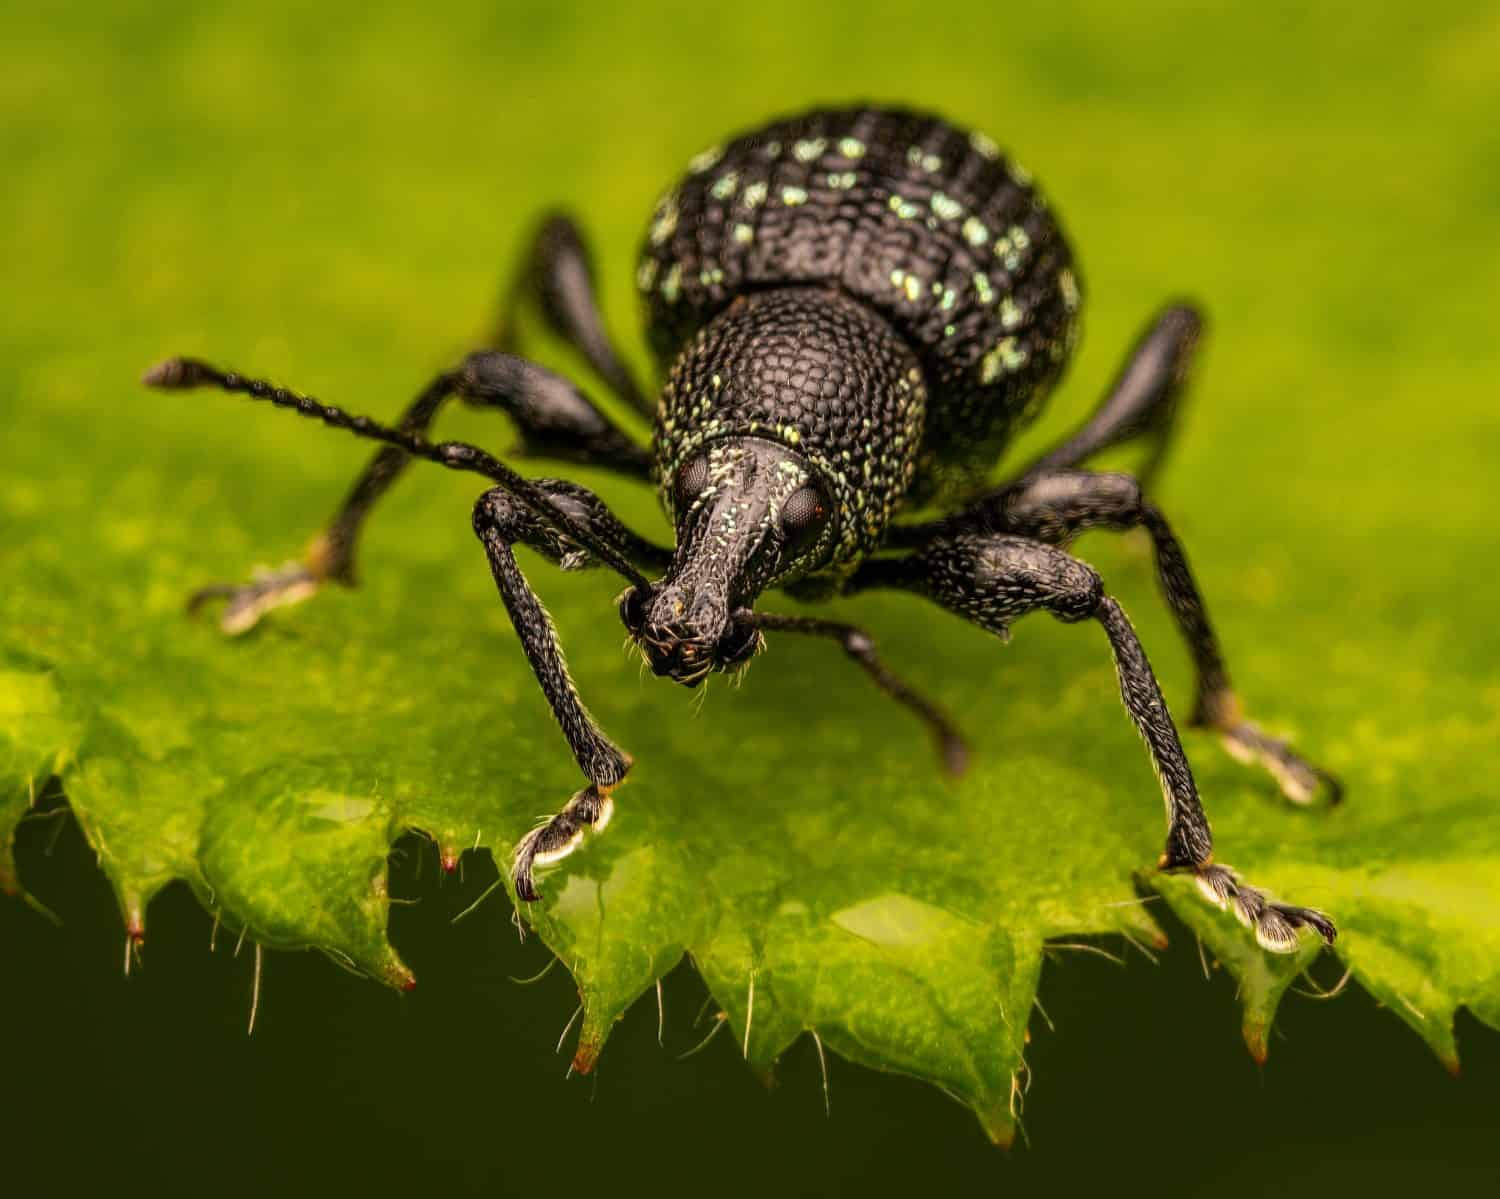 Macrophotography of a Black Vine Weevil (Otiorhyncus sulcatus) with green and black background.